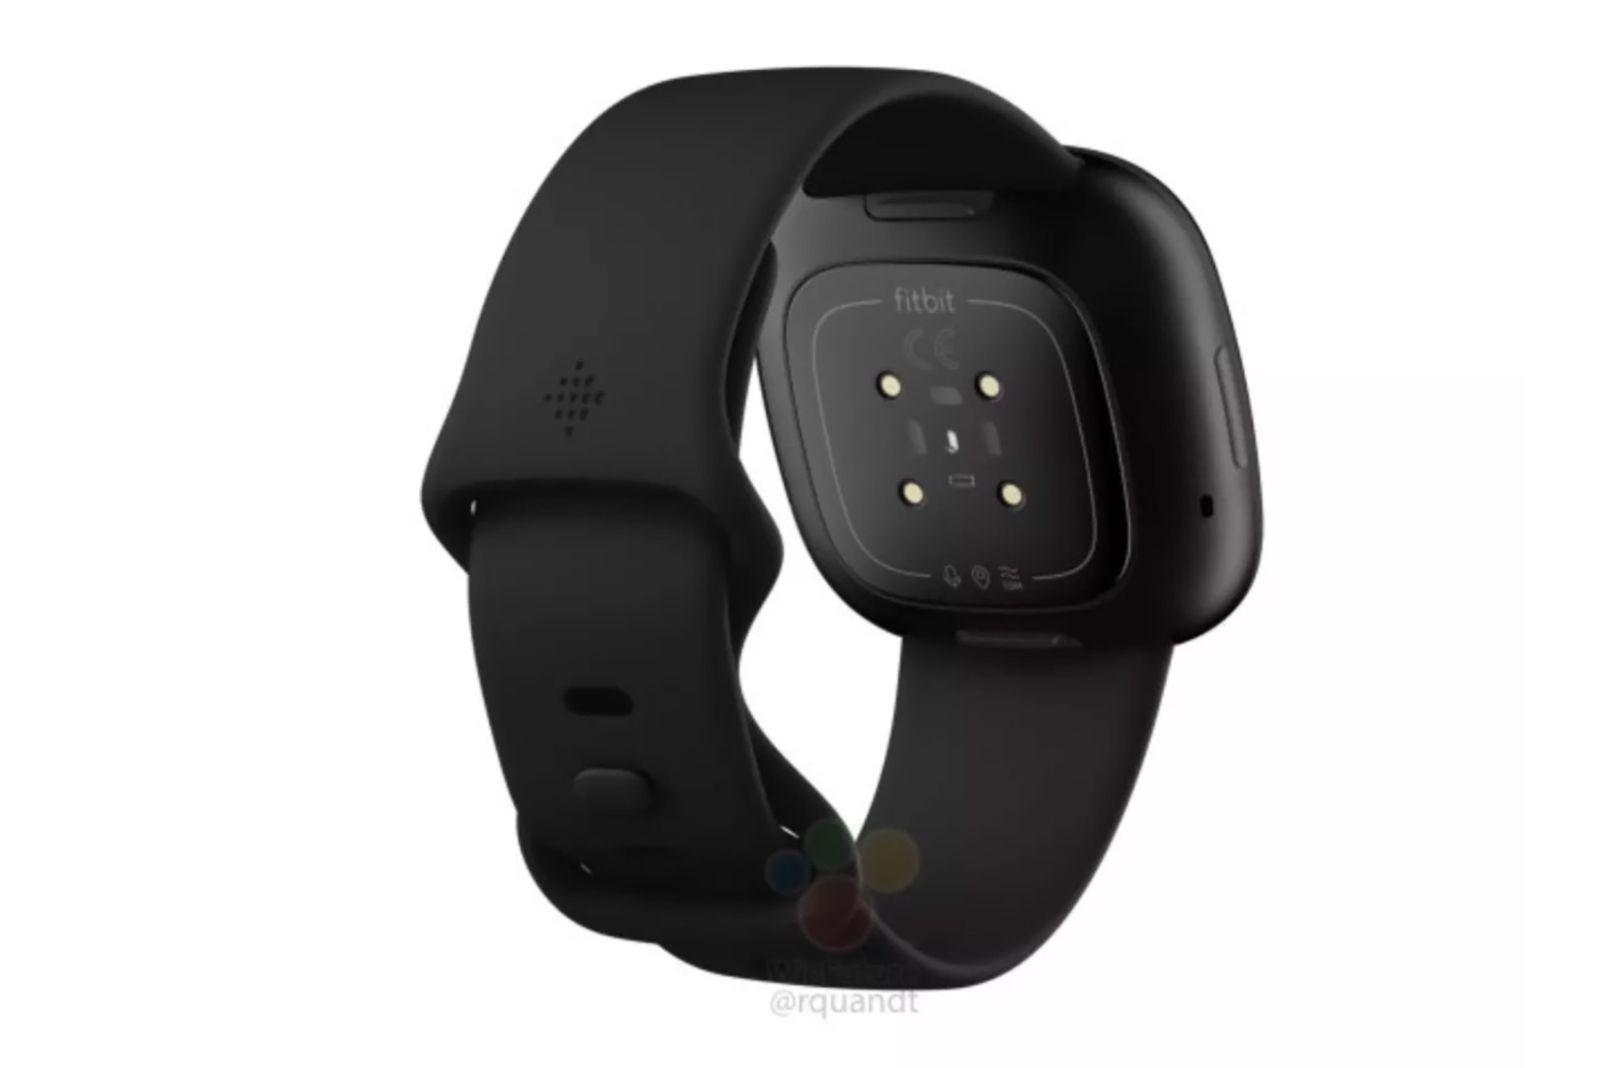 Fitbit Versa 3 and Fitbit Sense button-less smartwatches revealed in leaked images photo 2